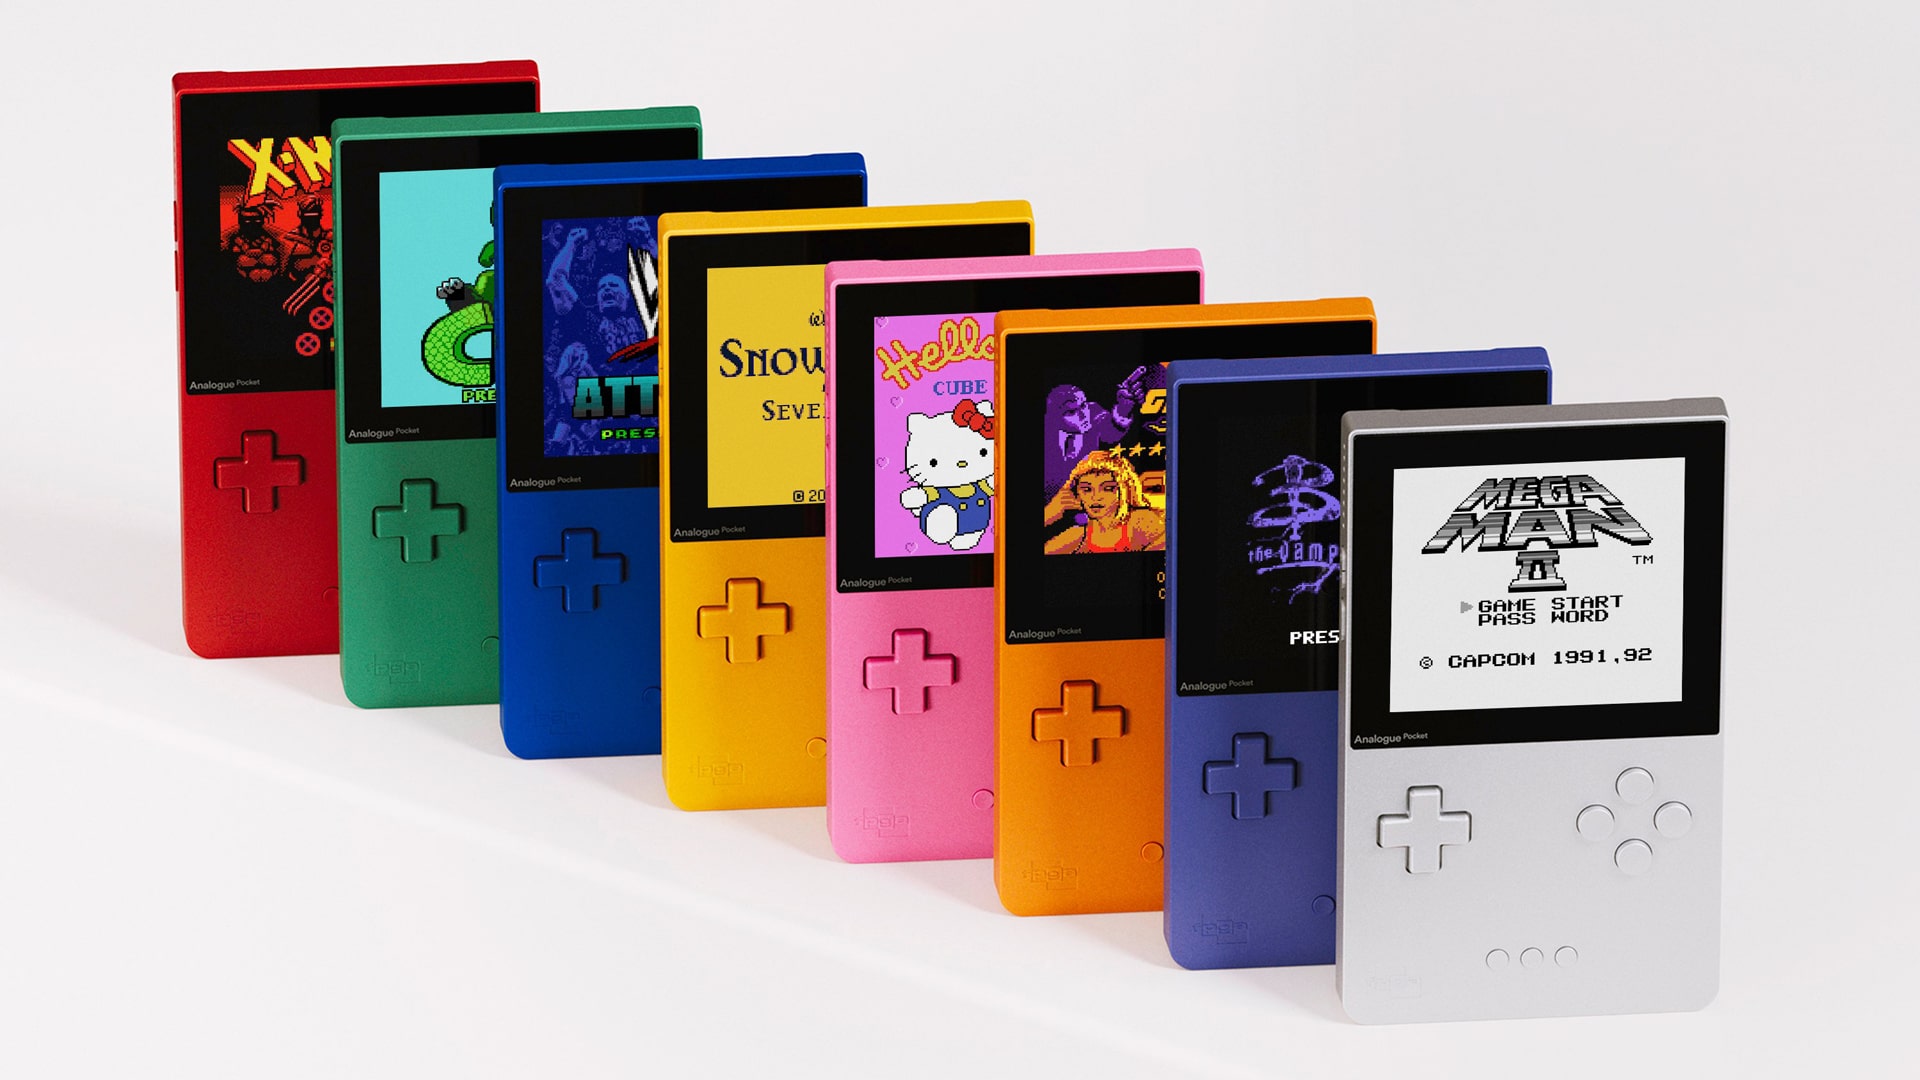 Analogue Pocket, a modern handheld console designed for classic gaming